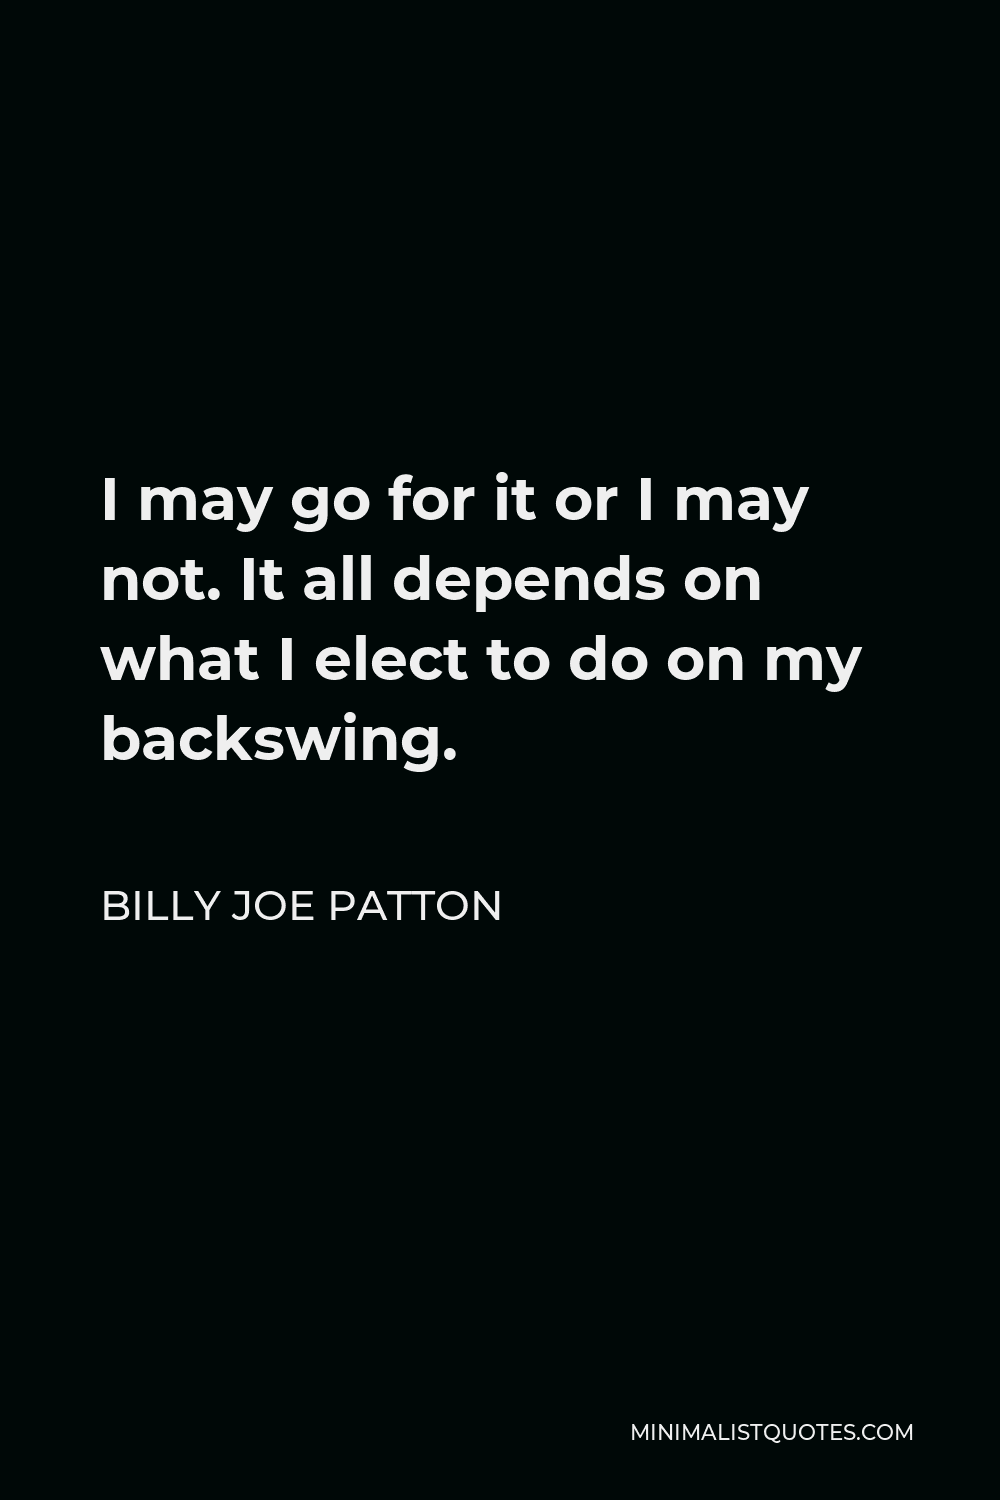 Billy Joe Patton Quote - I may go for it or I may not. It all depends on what I elect to do on my backswing.